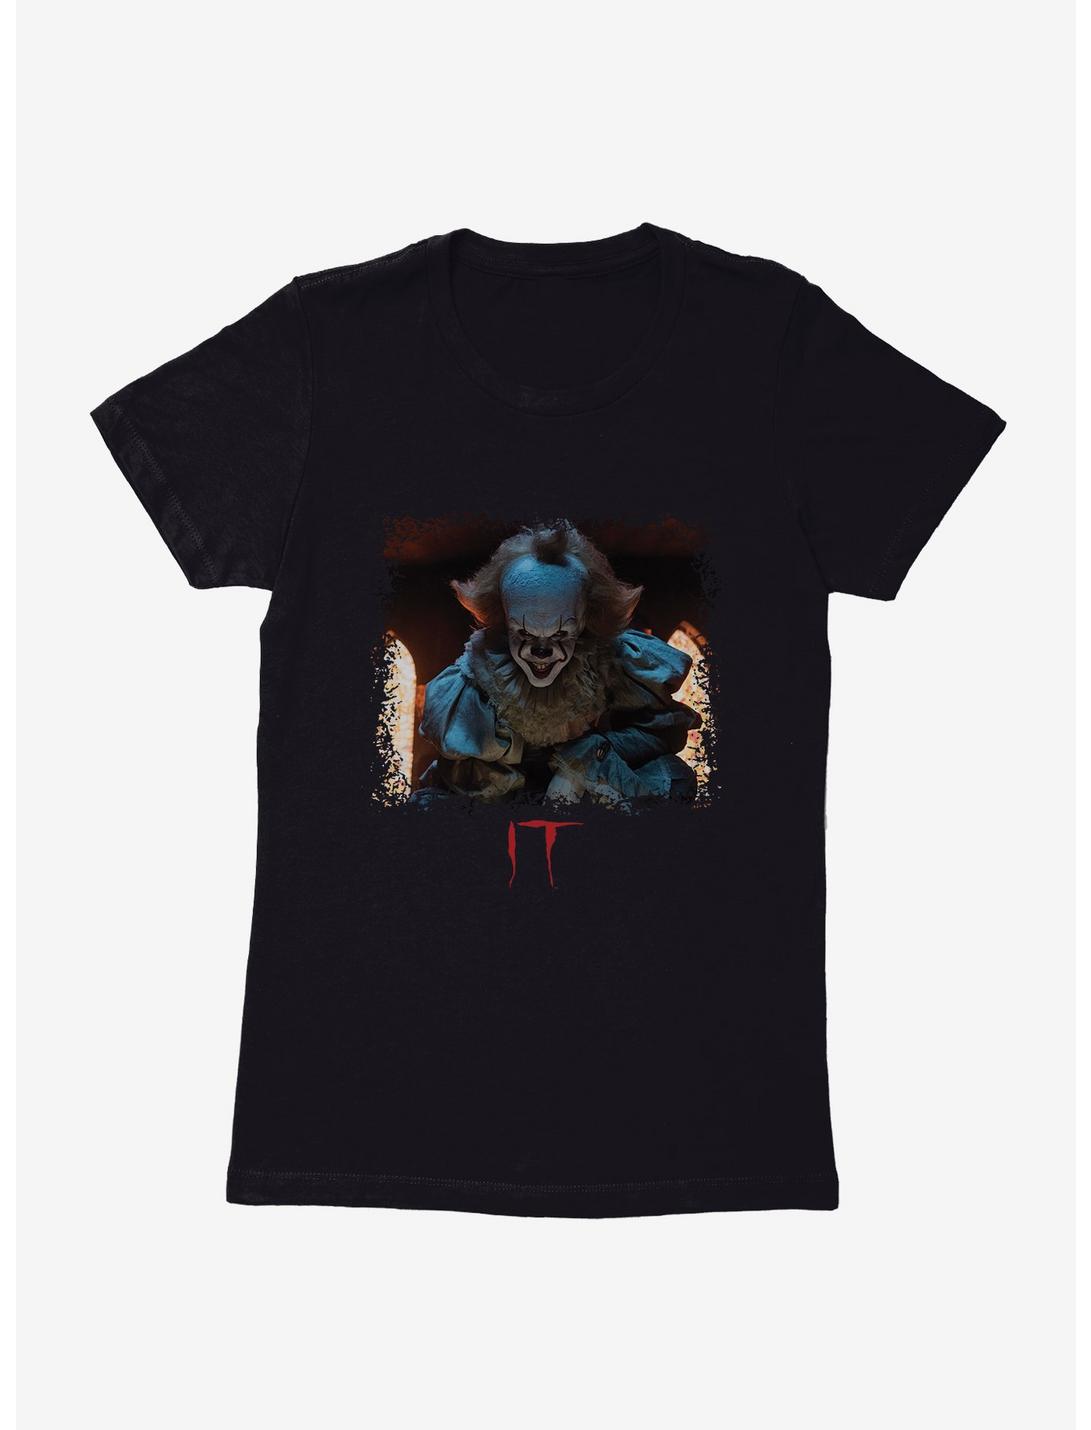 IT Pennywise Mischievous Smile Womens T-Shirt, , hi-res